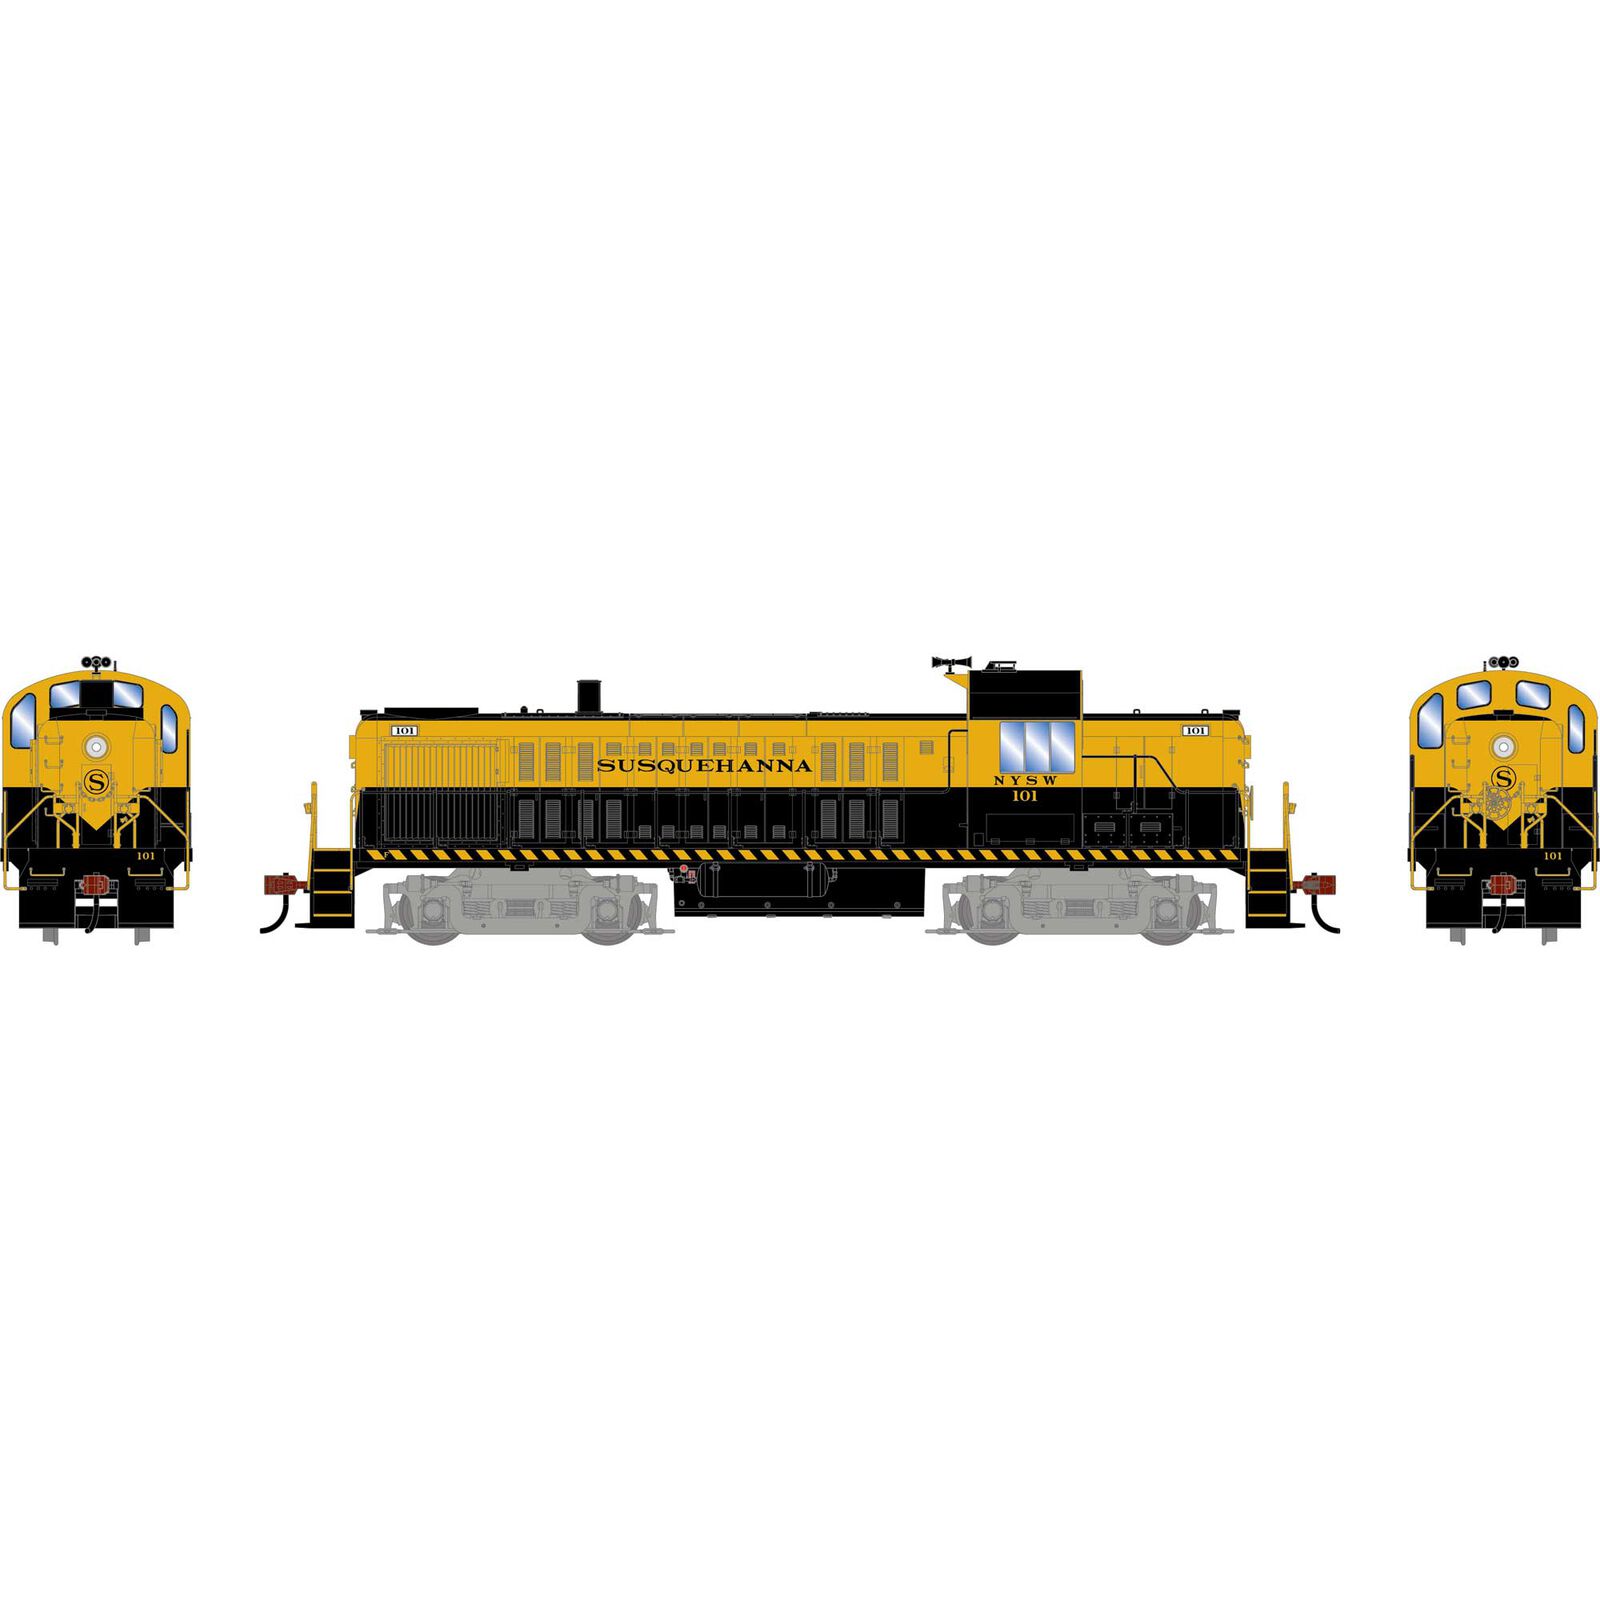 HO RS-3 Locomotive with DCC & Sound, NYSW #101